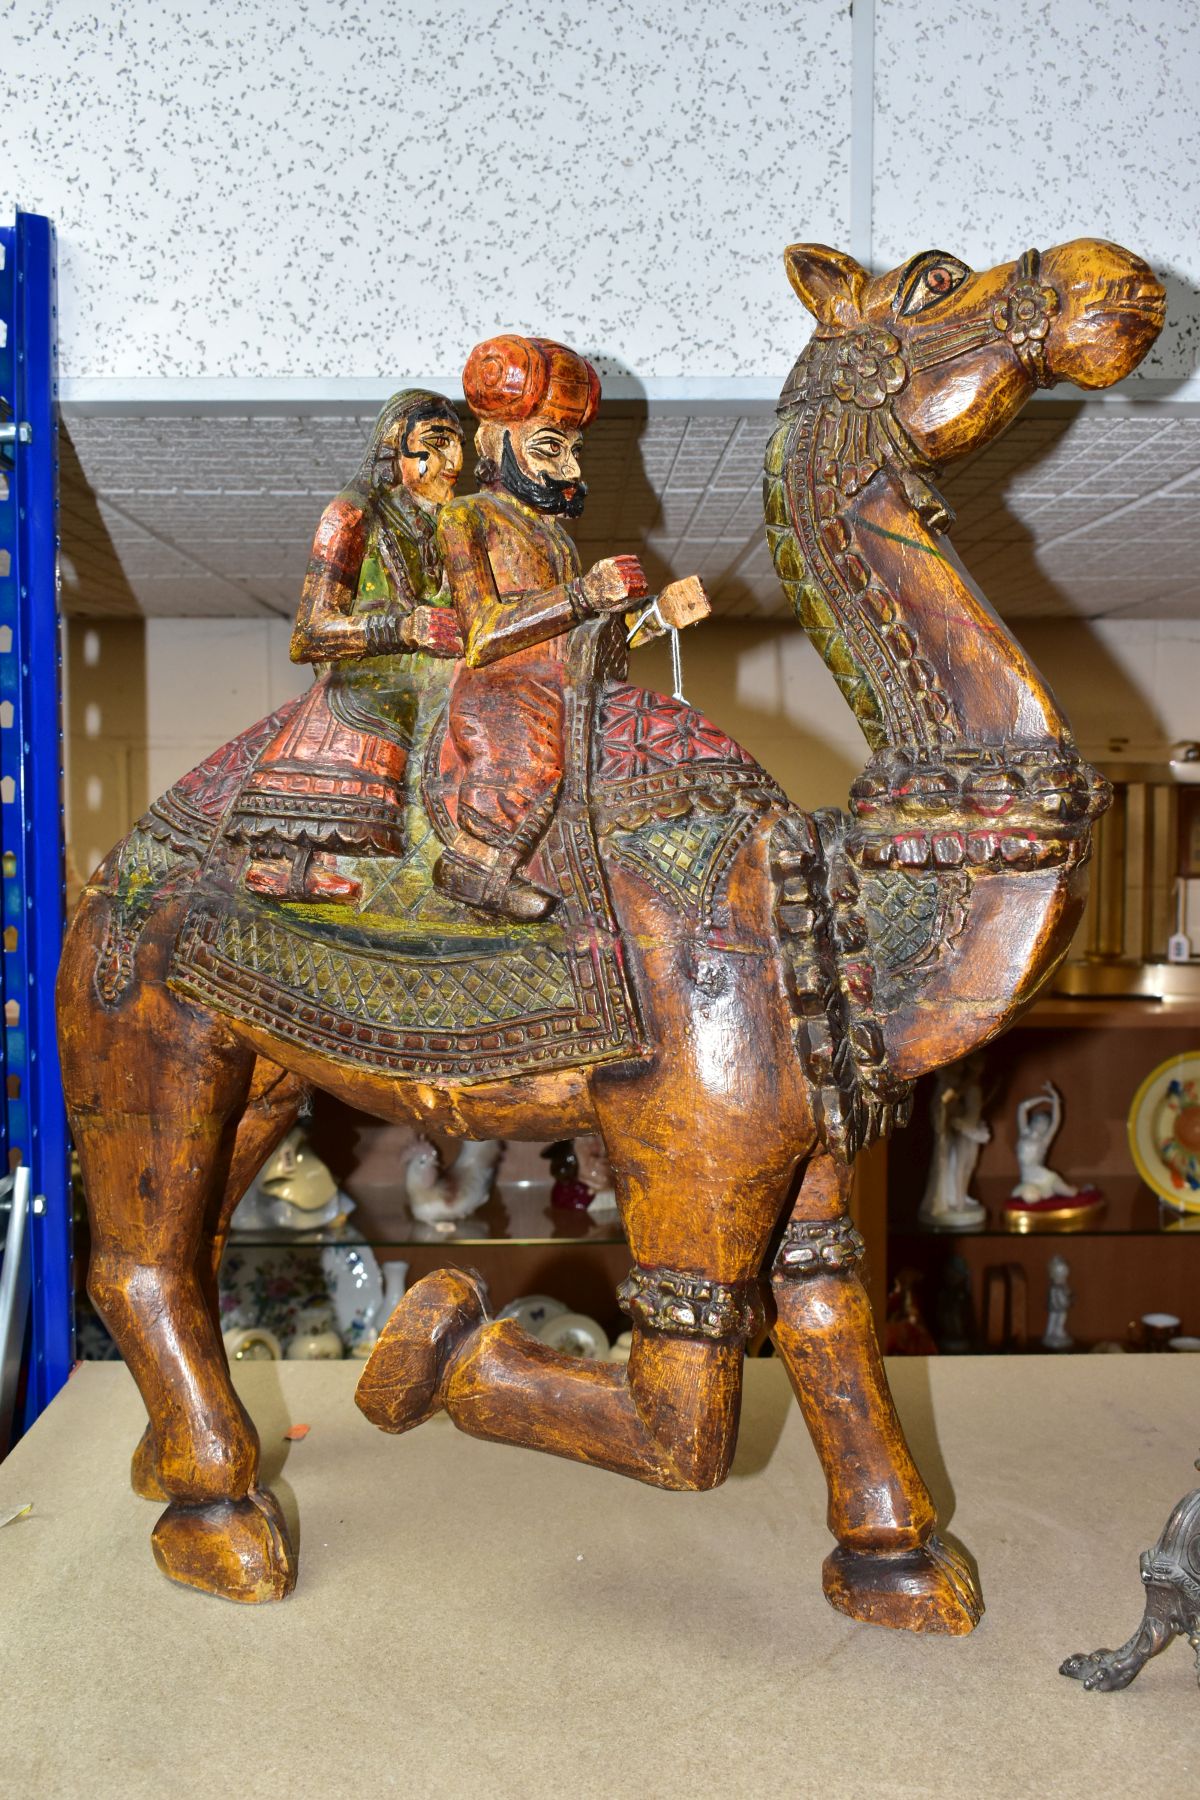 A LARGE WOODEN CARVED CAMEL WITH RIDERS, with carved and painted details, it may depict the - Image 5 of 9